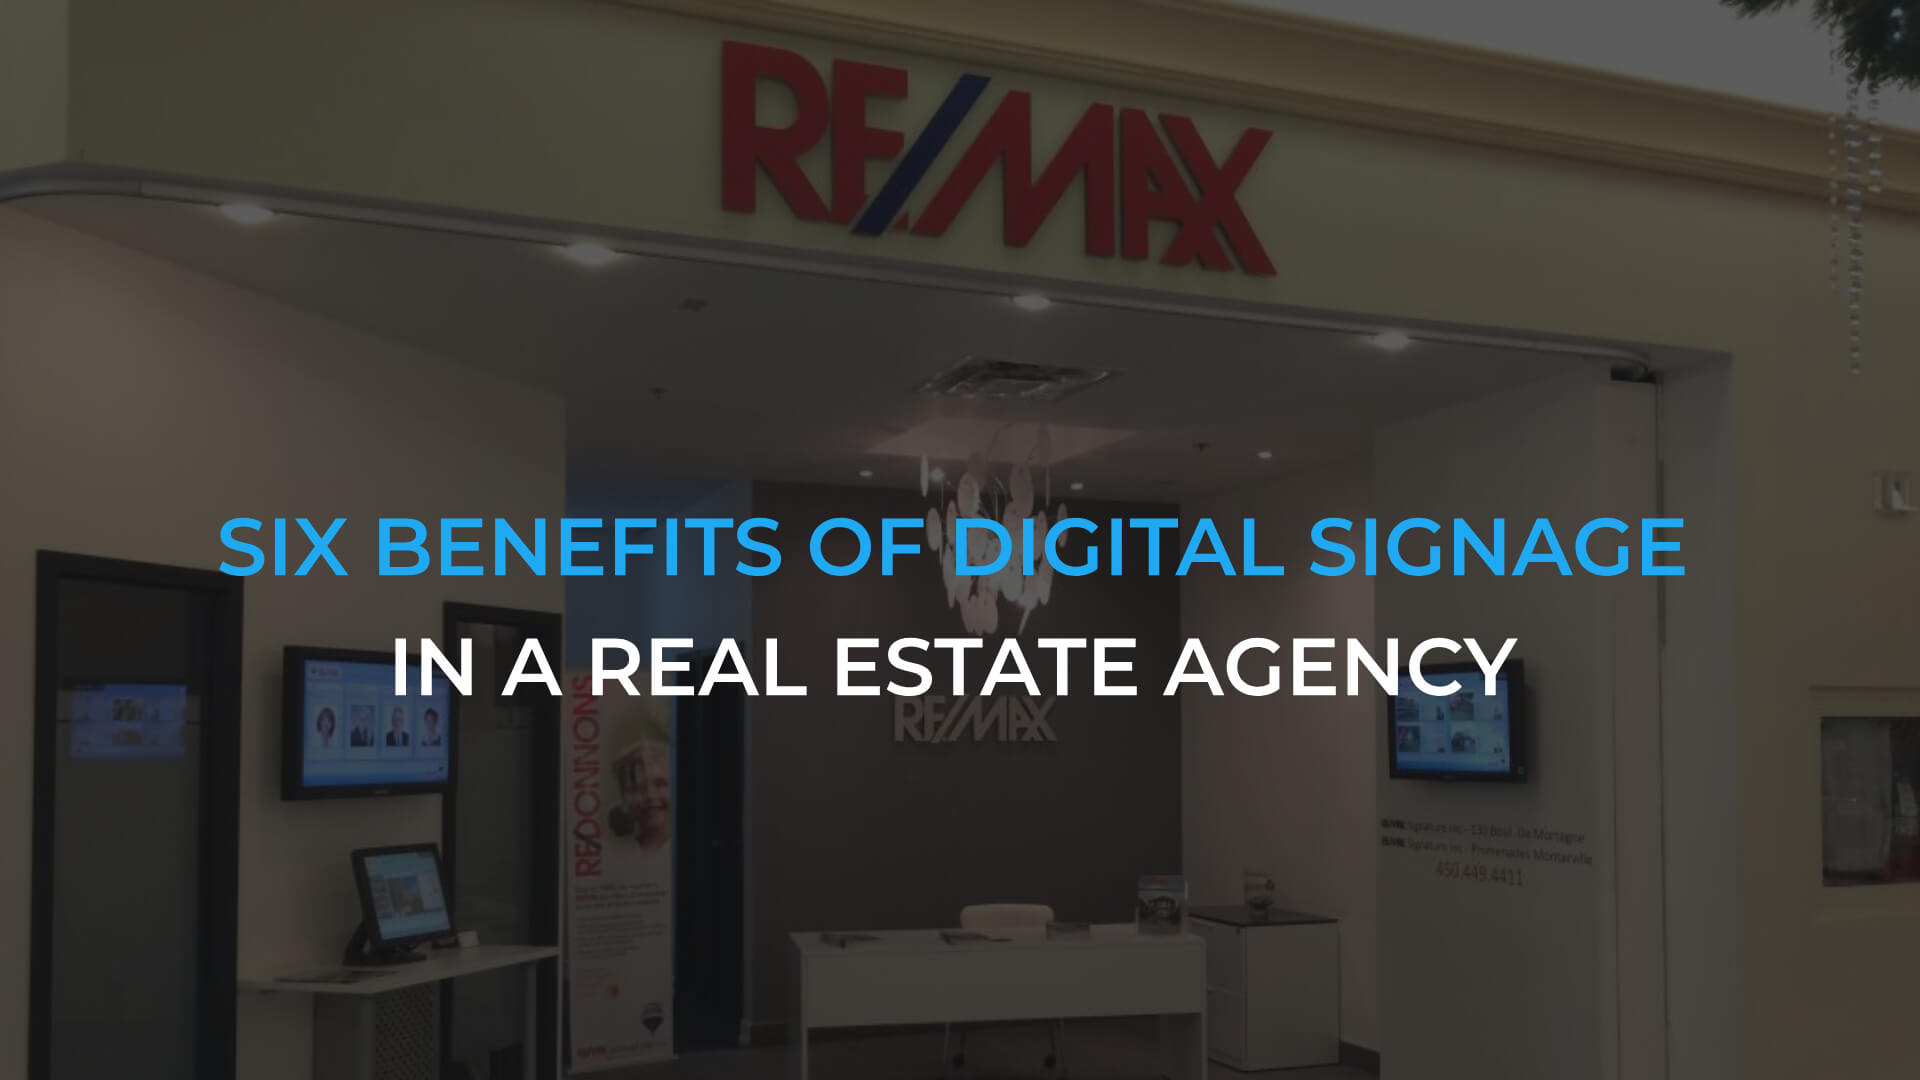 The Six Benefits of Digital Signage in a Real Estate Agency